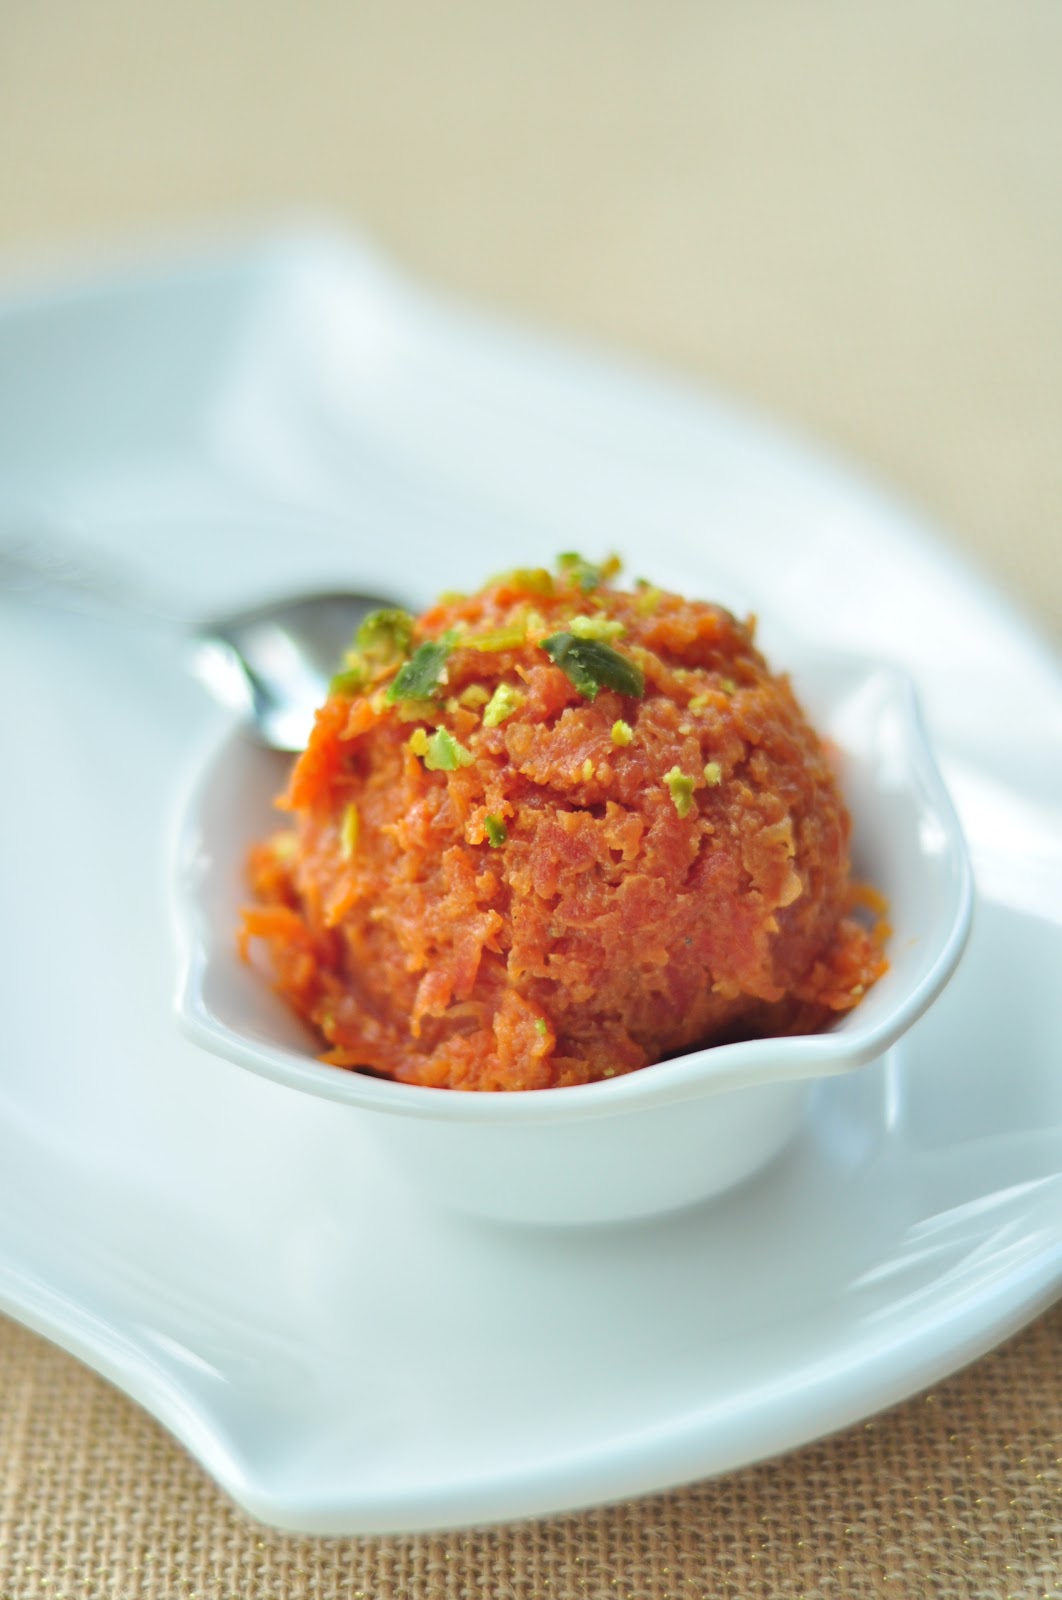 Served with love: Gajar Halwa/ Indian Carrot Pudding